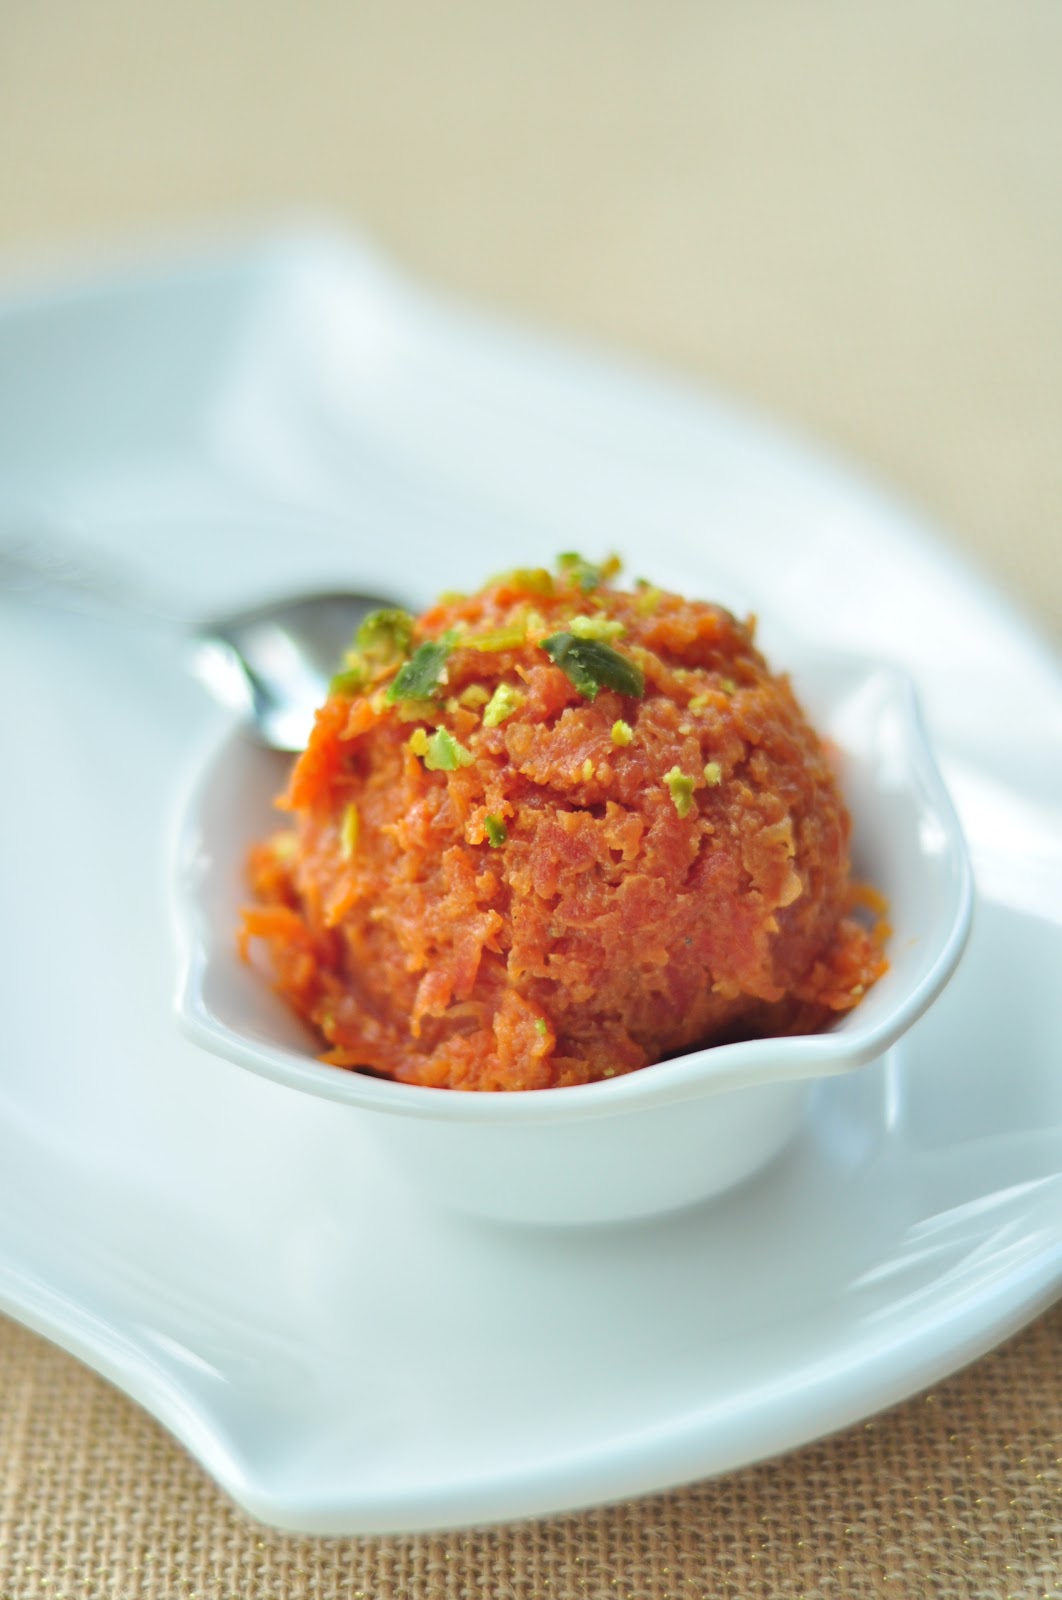 Served with love: Gajar Halwa/ Indian Carrot Pudding